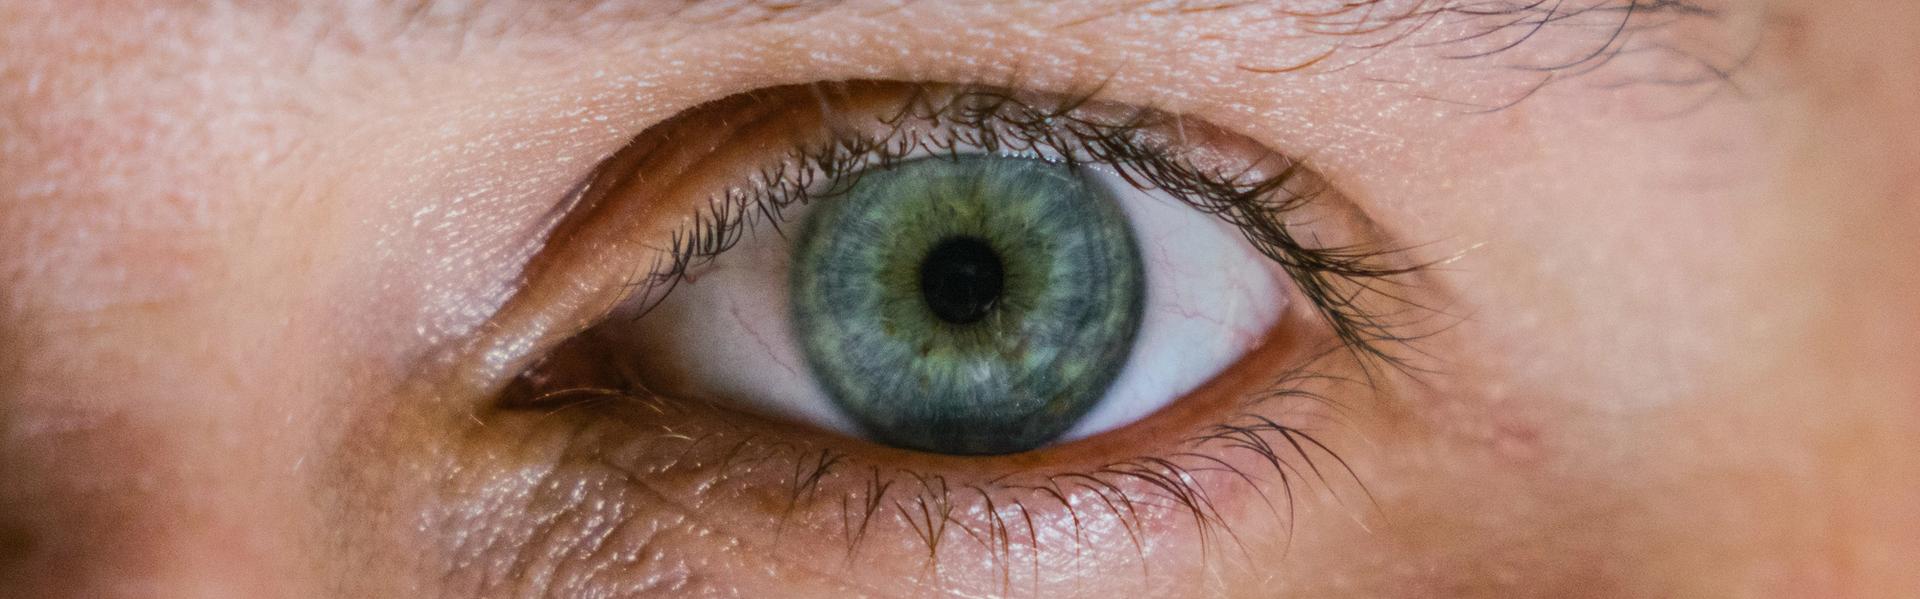 Horizontal Gaze Nystagmus: The DUI Test You Haven't Heard Of